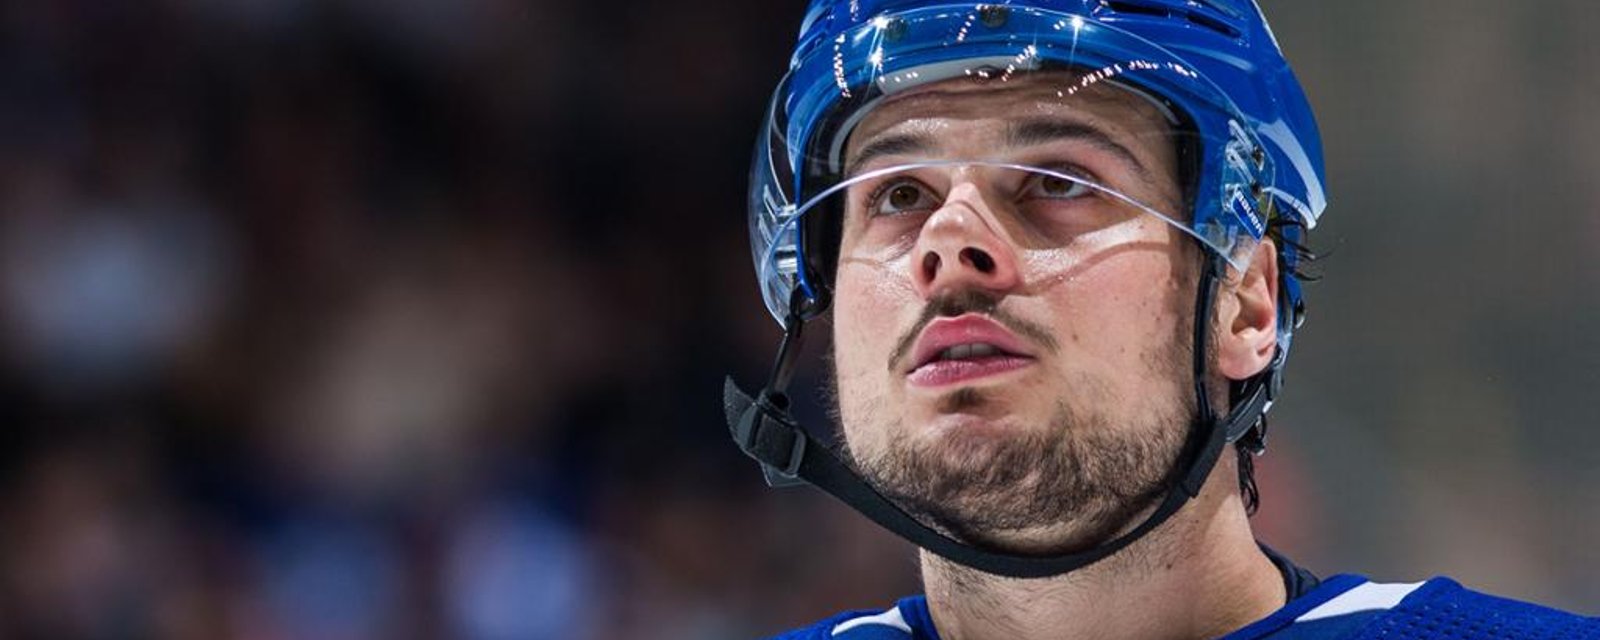 Latest update issued on where Auston Matthews now stands in Toronto